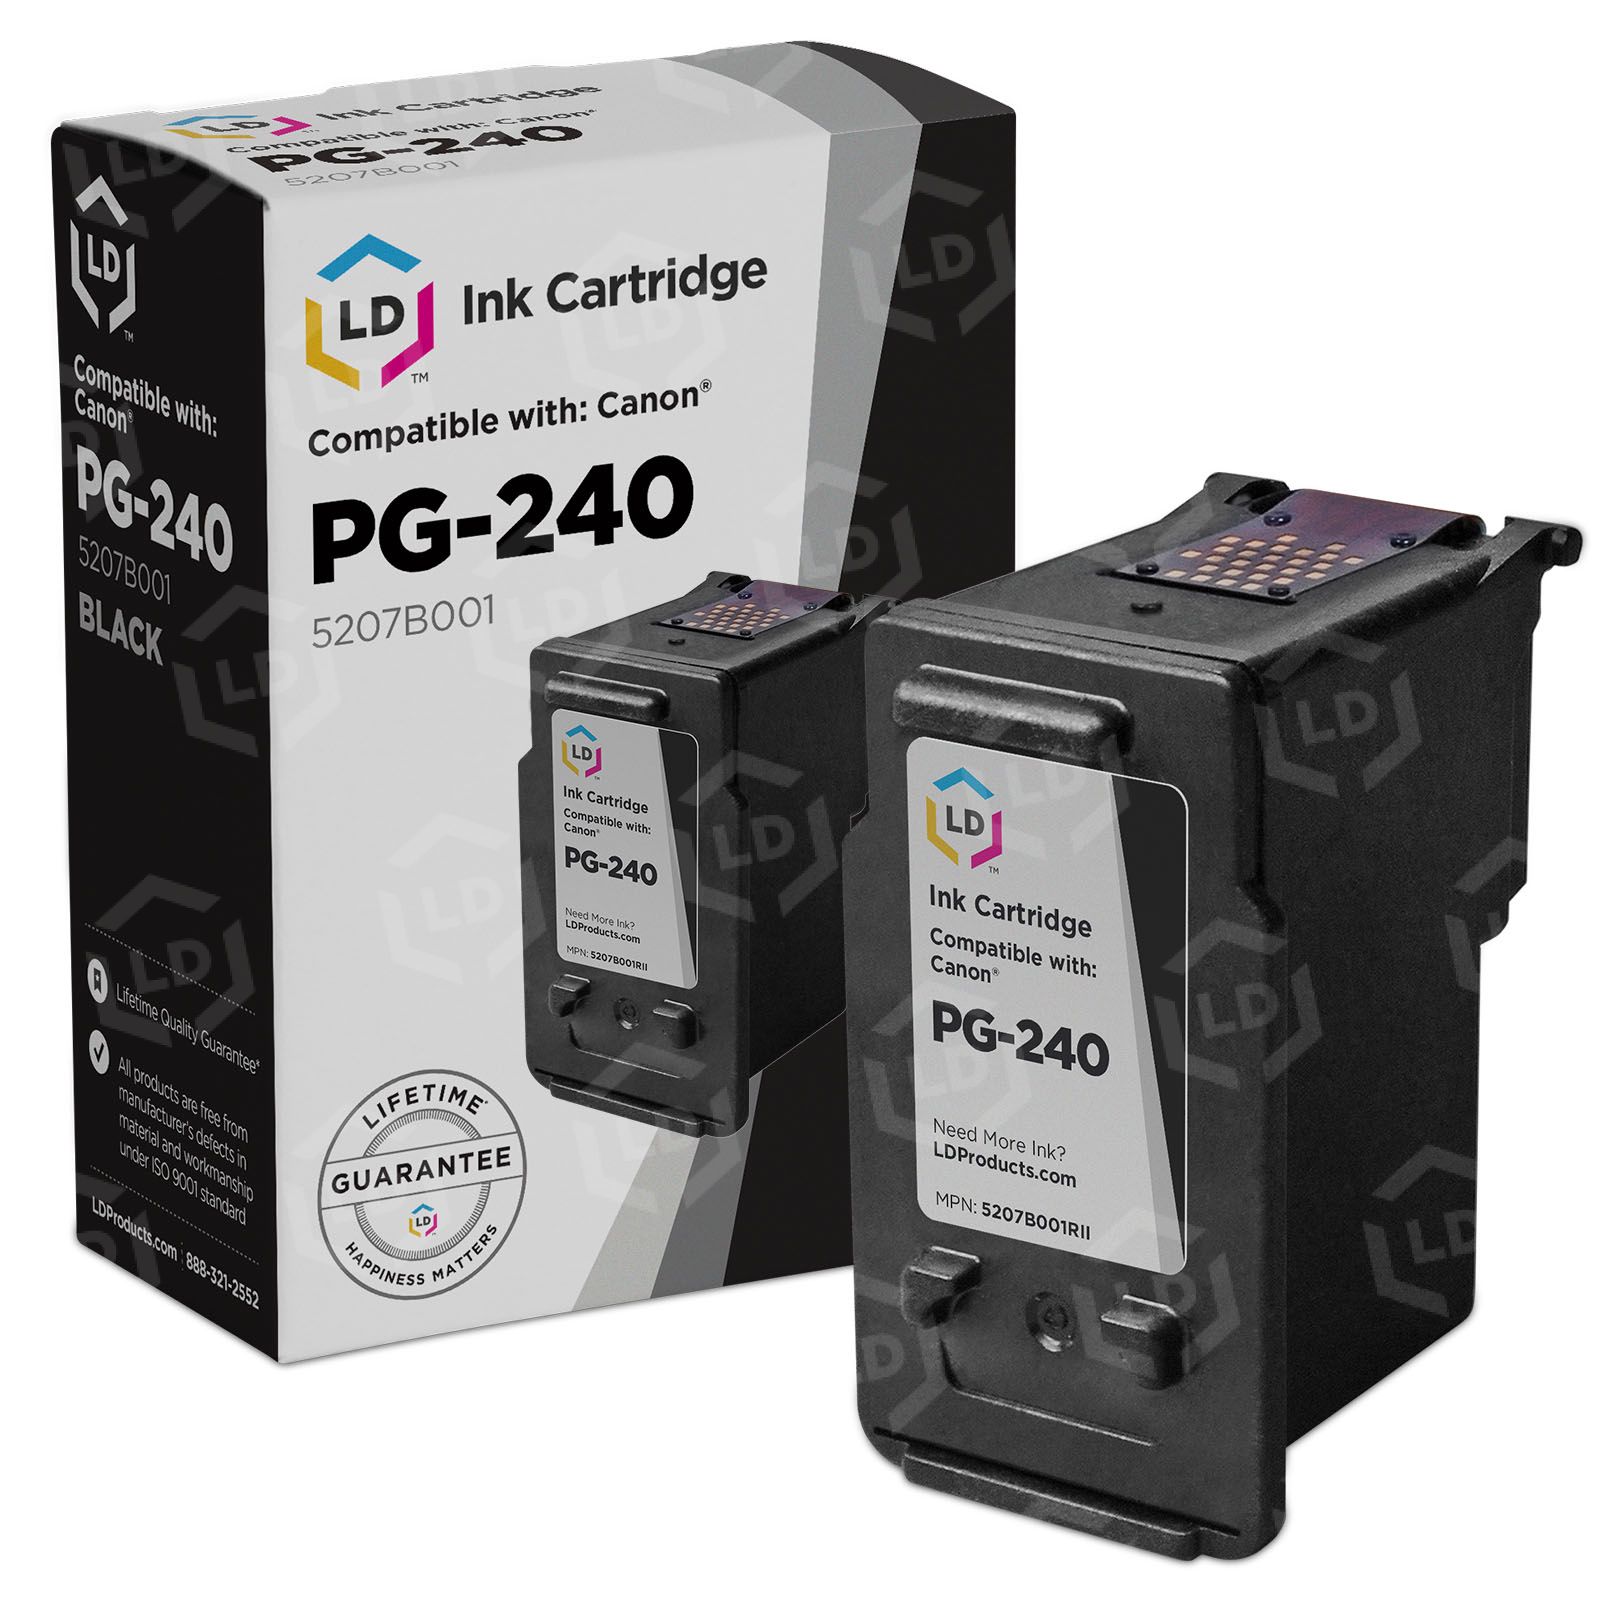 Canon PG240 Black Ink LD Products